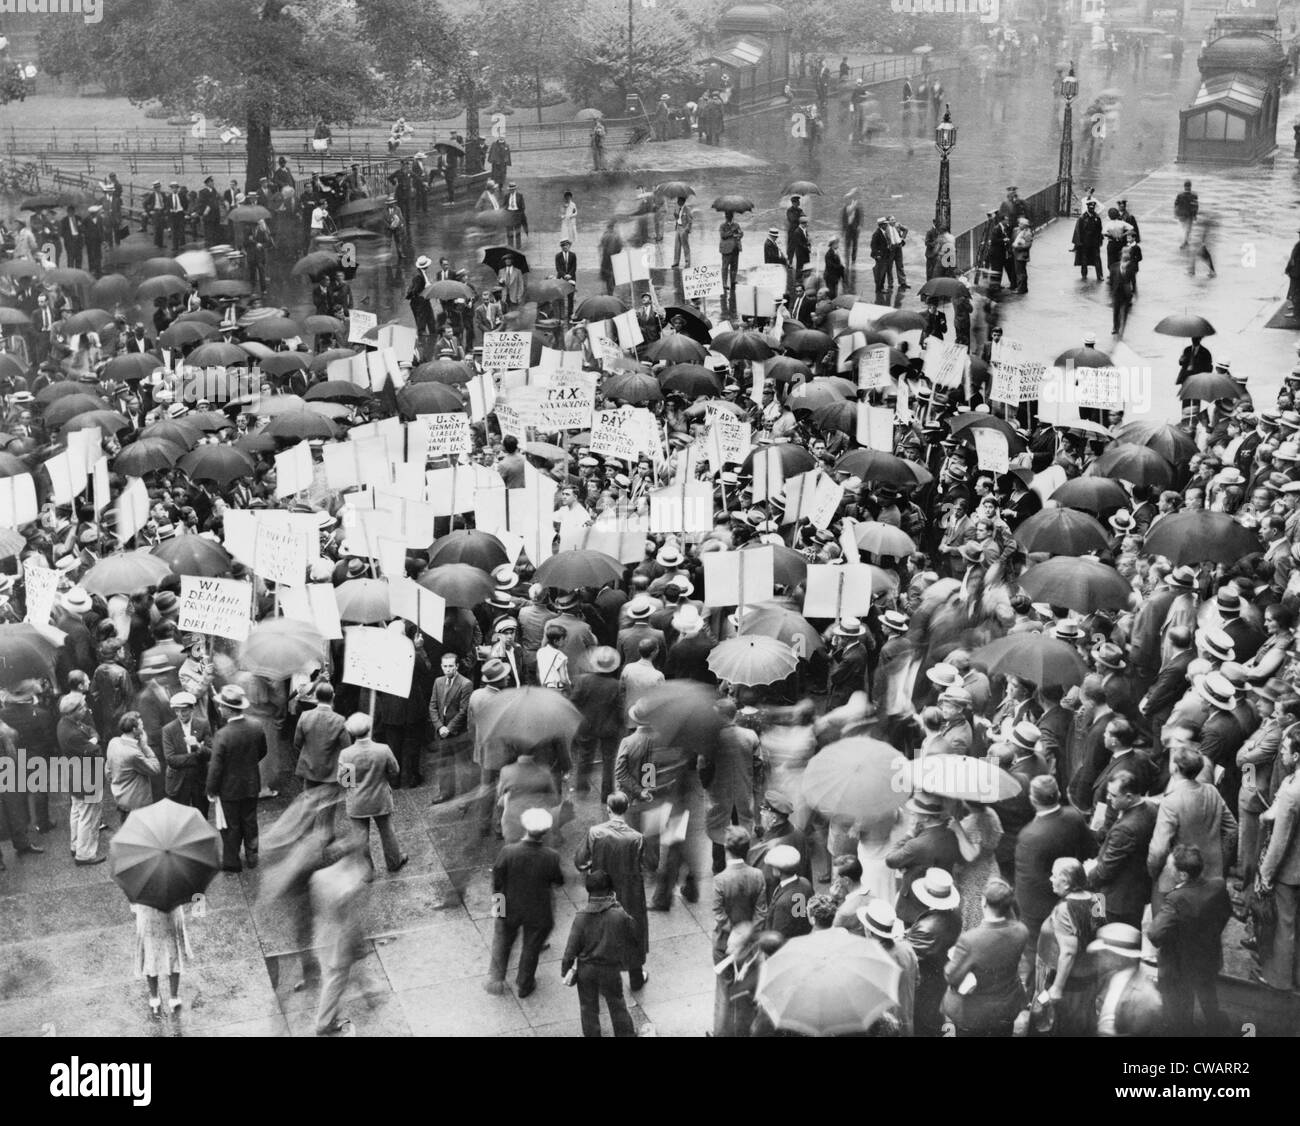 The Great Depression. A crowd of depositors protest in the rain at the Bank of United States after its failure.  Signs demand Stock Photo